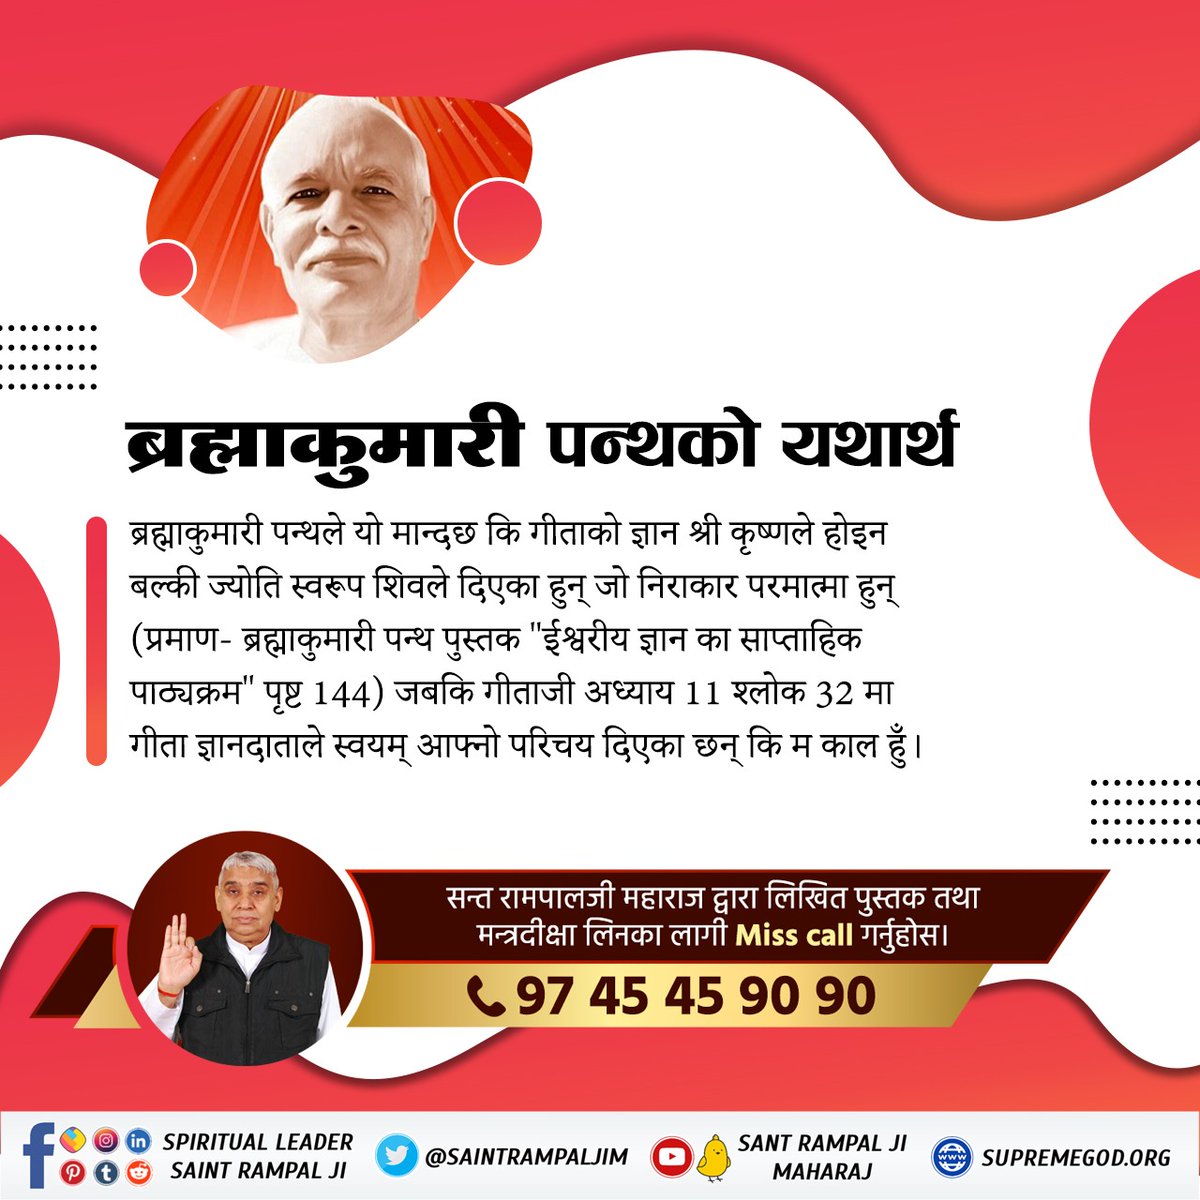 #Reality_Of_BrahmaKumari_Panth Currently, there is only one enlightened sage who is giving true spiritual knowledge from our holy scriptures. He is guiding mankind on the way to attain salvation.This enlightened sage is Saint Rampal Ji Maharaj .